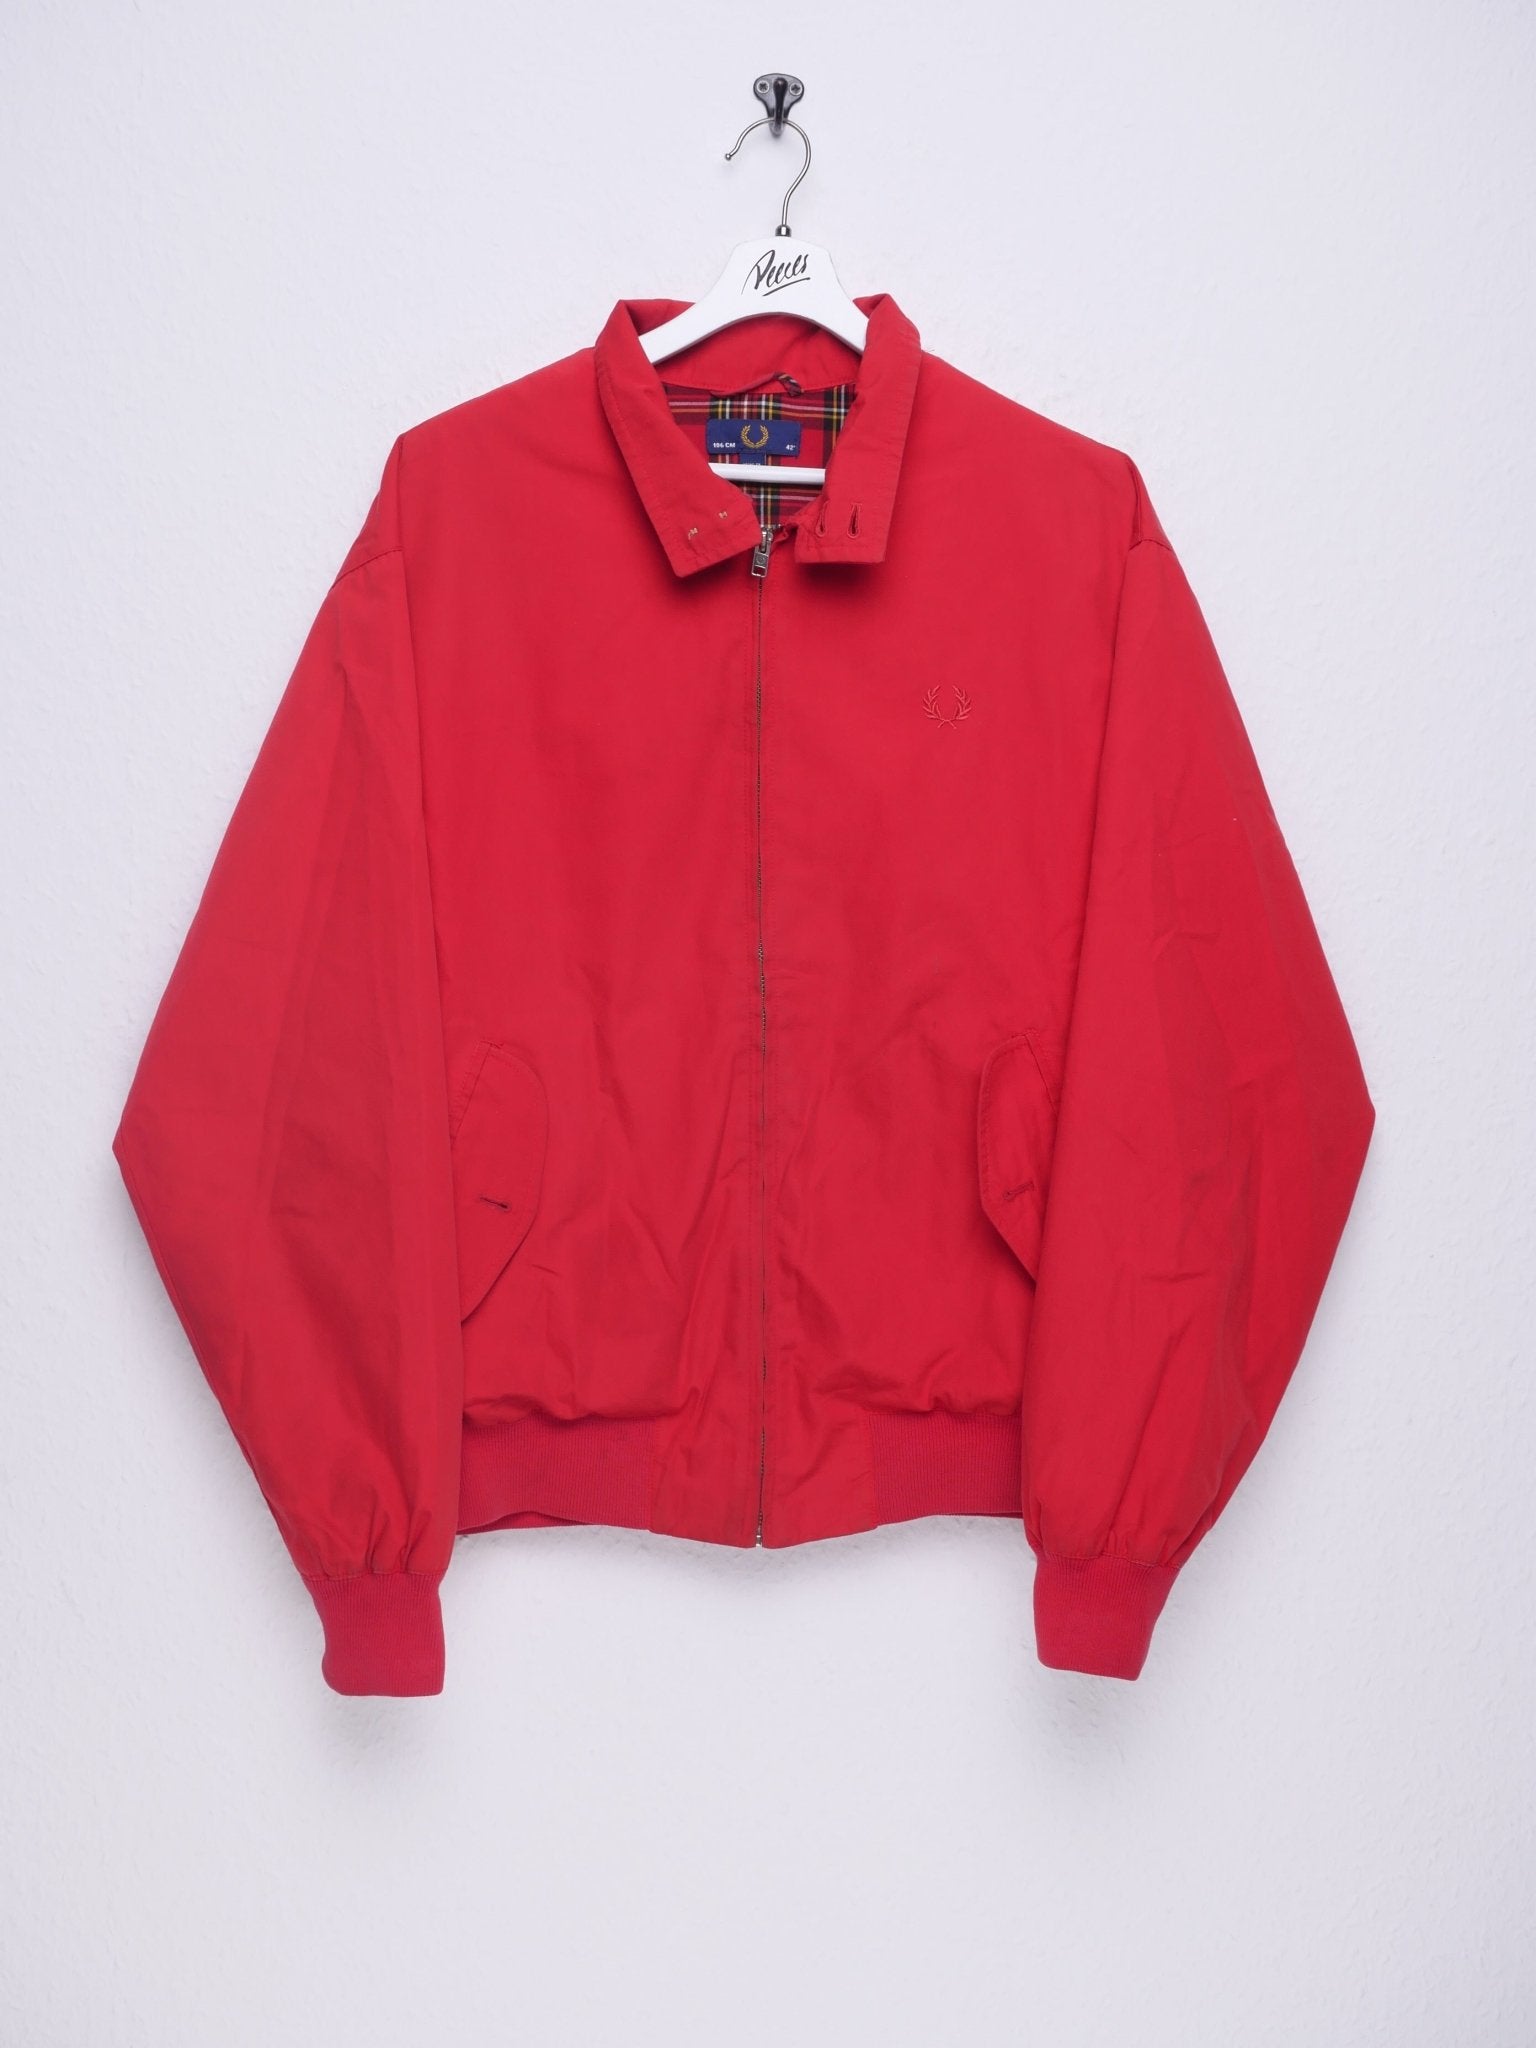 Fred Perry embroidered Logo red Jacke - Peeces